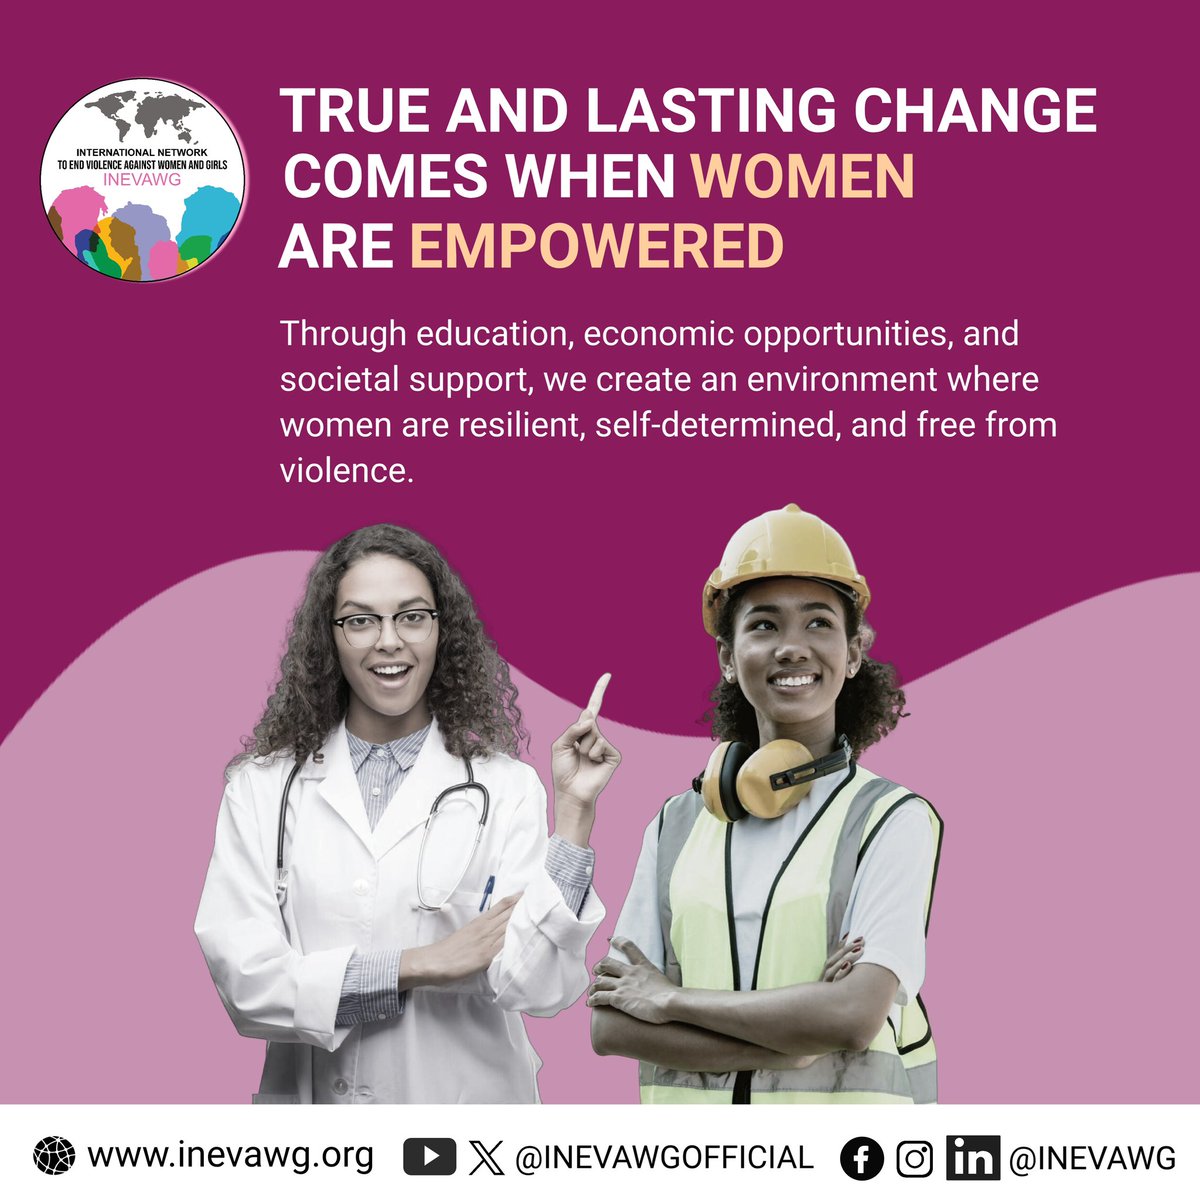 Empowering women serves as a transformative strategy to combat Violence Against Women and Girls (VAWG). By fostering women's autonomy, equality, & participation in all aspects of life, we break the roots of VAWG.

#Thread
#INEVAWG #EndVAWG #PoliticalAction #VAWG #Repoliticization